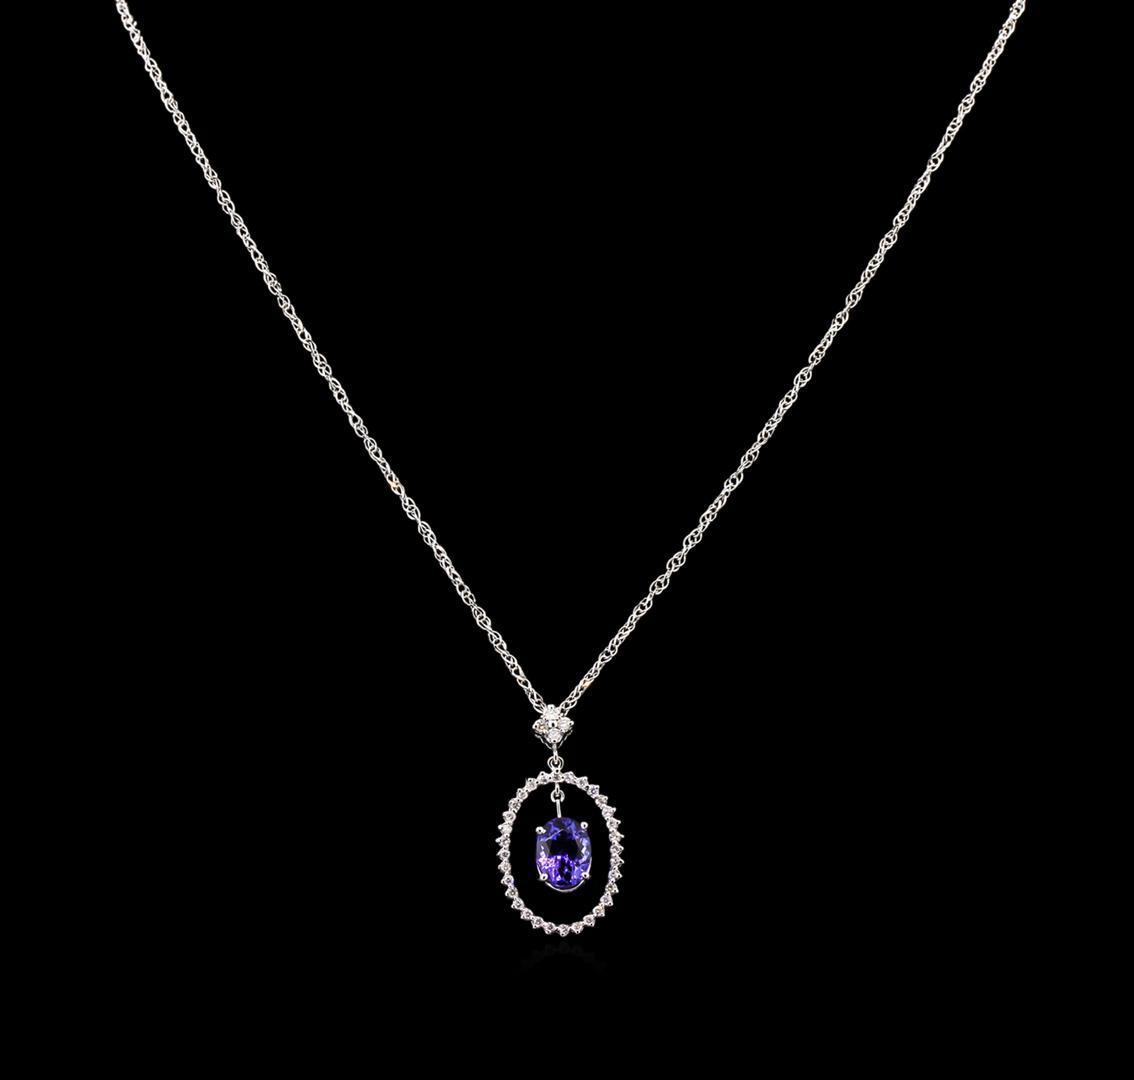 2.78 ctw Tanzanite and Diamond Pendant With Chain - 14KT White Gold